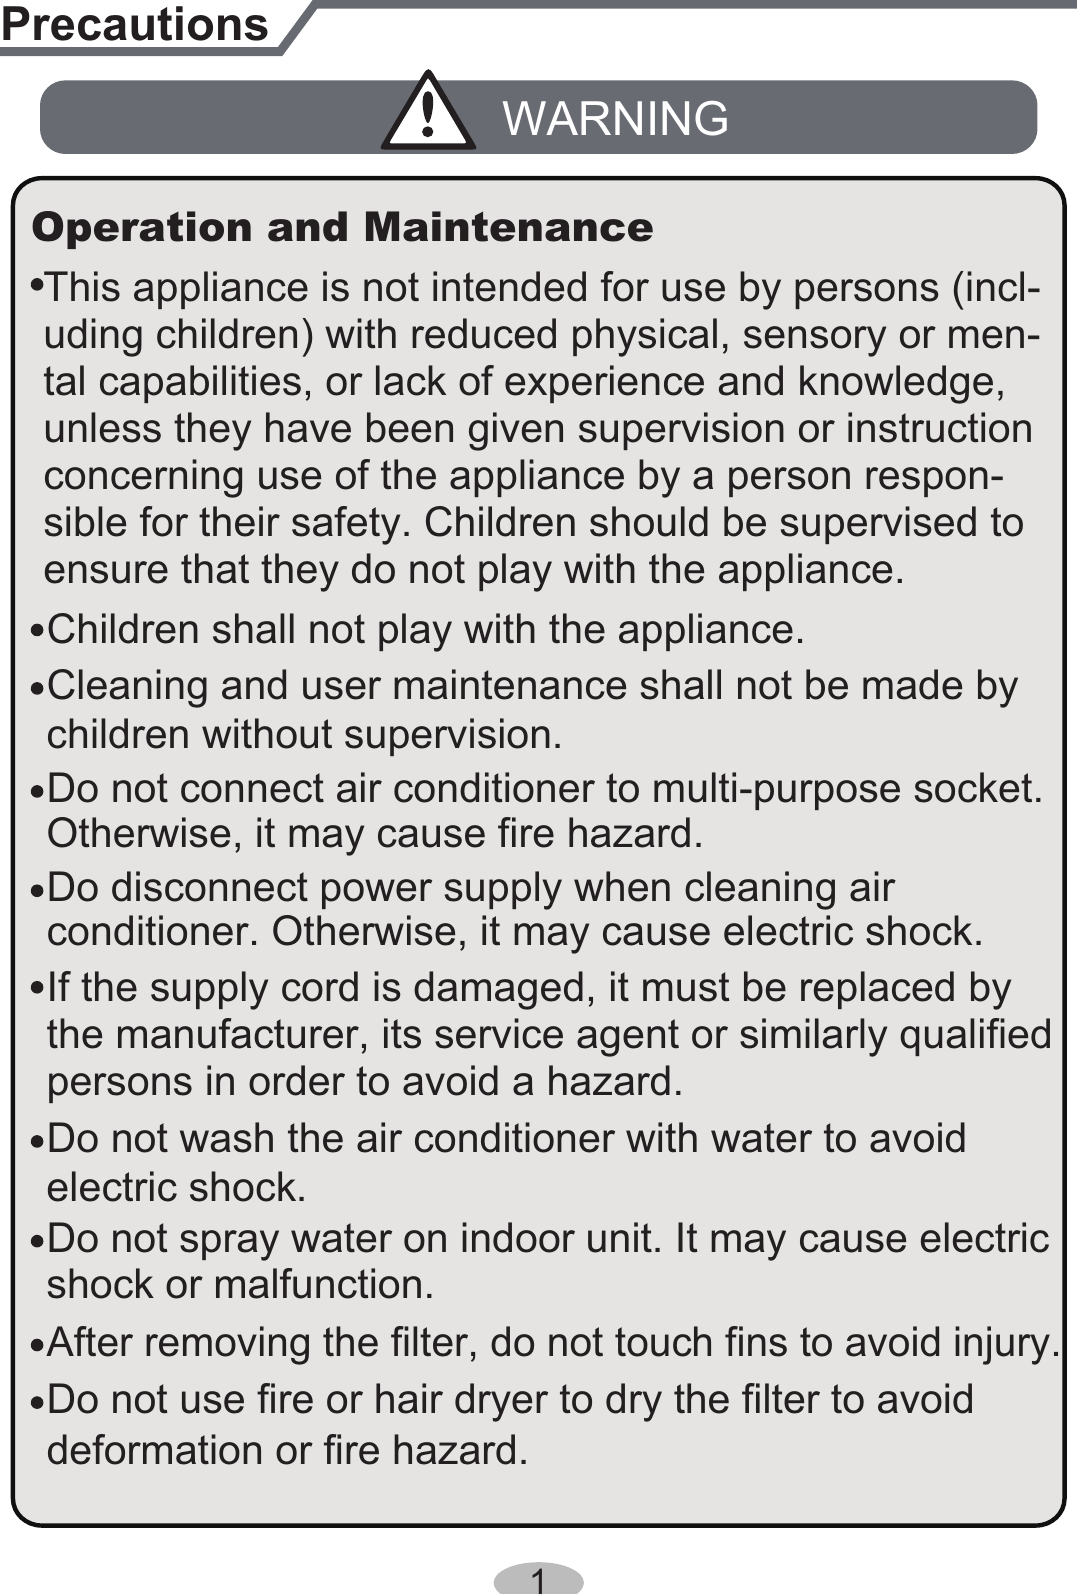 1PrecautionsWARNINGDo not connect air conditioner to multi-purpose socket.This appliance is not intended for use by persons (incl-Operation and MaintenanceIf the supply cord is damaged, it must be replaced by the manufacturer, its service agent or similarly qualified persons in order to avoid a hazard.Do not spray water on indoor unit. It may cause electricshock or malfunction.Otherwise, it may cause fire hazard.Children shall not play with the appliance.Cleaning and user maintenance shall not be made by children without supervision.uding children) with reduced physical, sensory or men-tal capabilities, or lack of experience and knowledge, unless they have been given supervision or instruction concerning use of the appliance by a person respon-sible for their safety. Children should be supervised toensure that they do not play with the appliance.Do not wash the air conditioner with water to avoid electric shock.After removing the filter, do not touch fins to avoid injury.Do not use fire or hair dryer to dry the filter to avoiddeformation or fire hazard.Do disconnect power supply when cleaning air conditioner. Otherwise, it may cause electric shock.